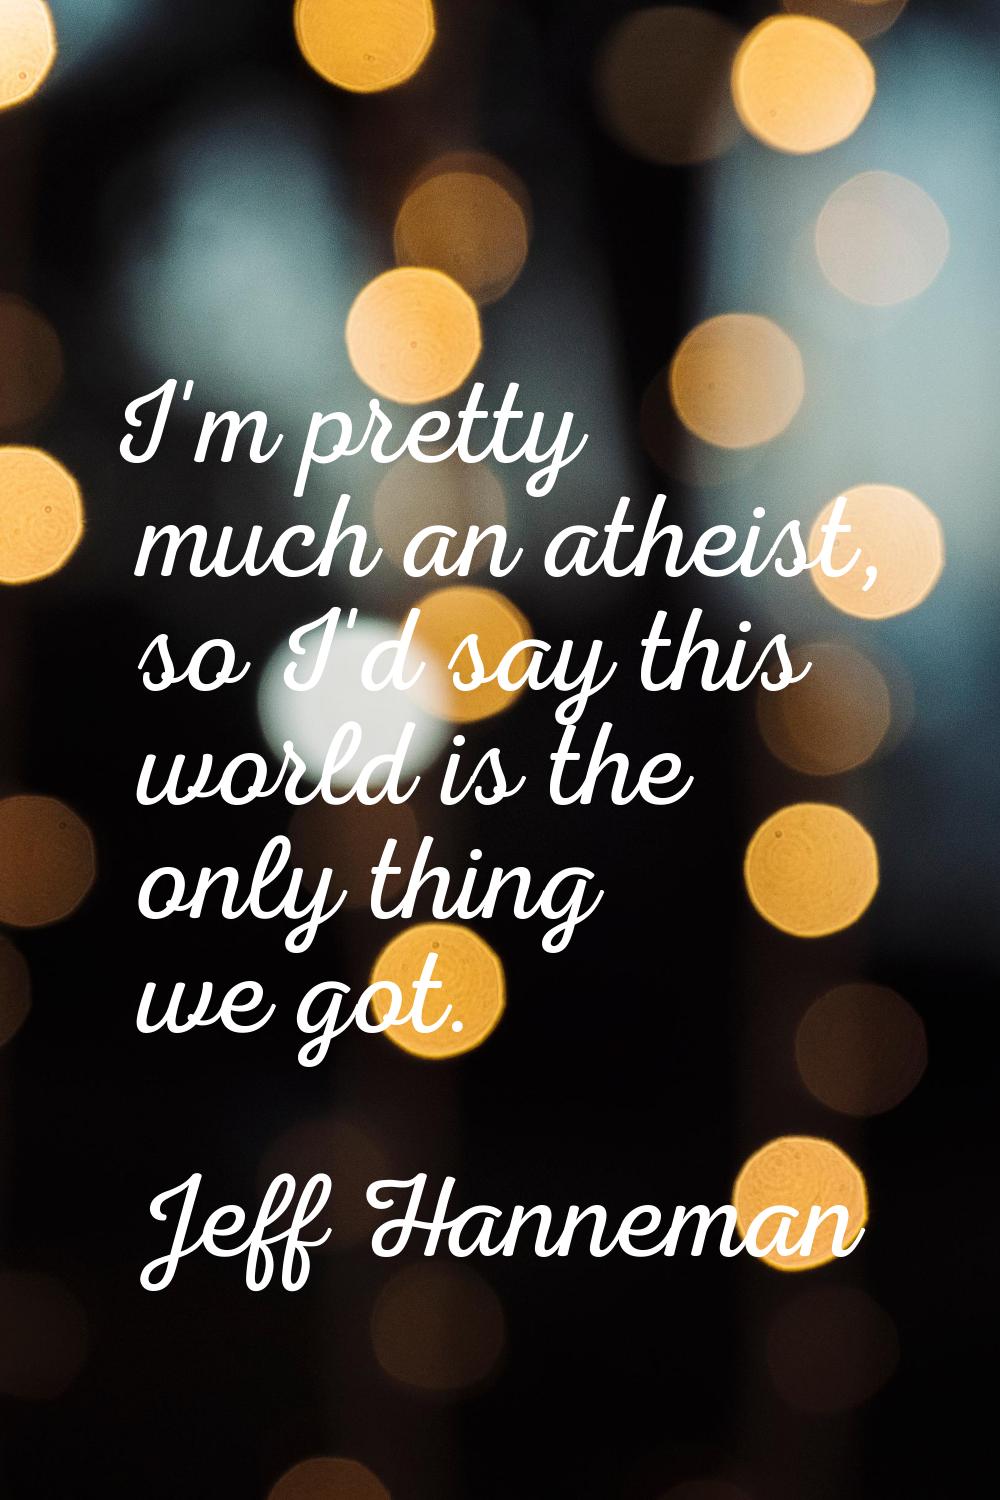 I'm pretty much an atheist, so I'd say this world is the only thing we got.